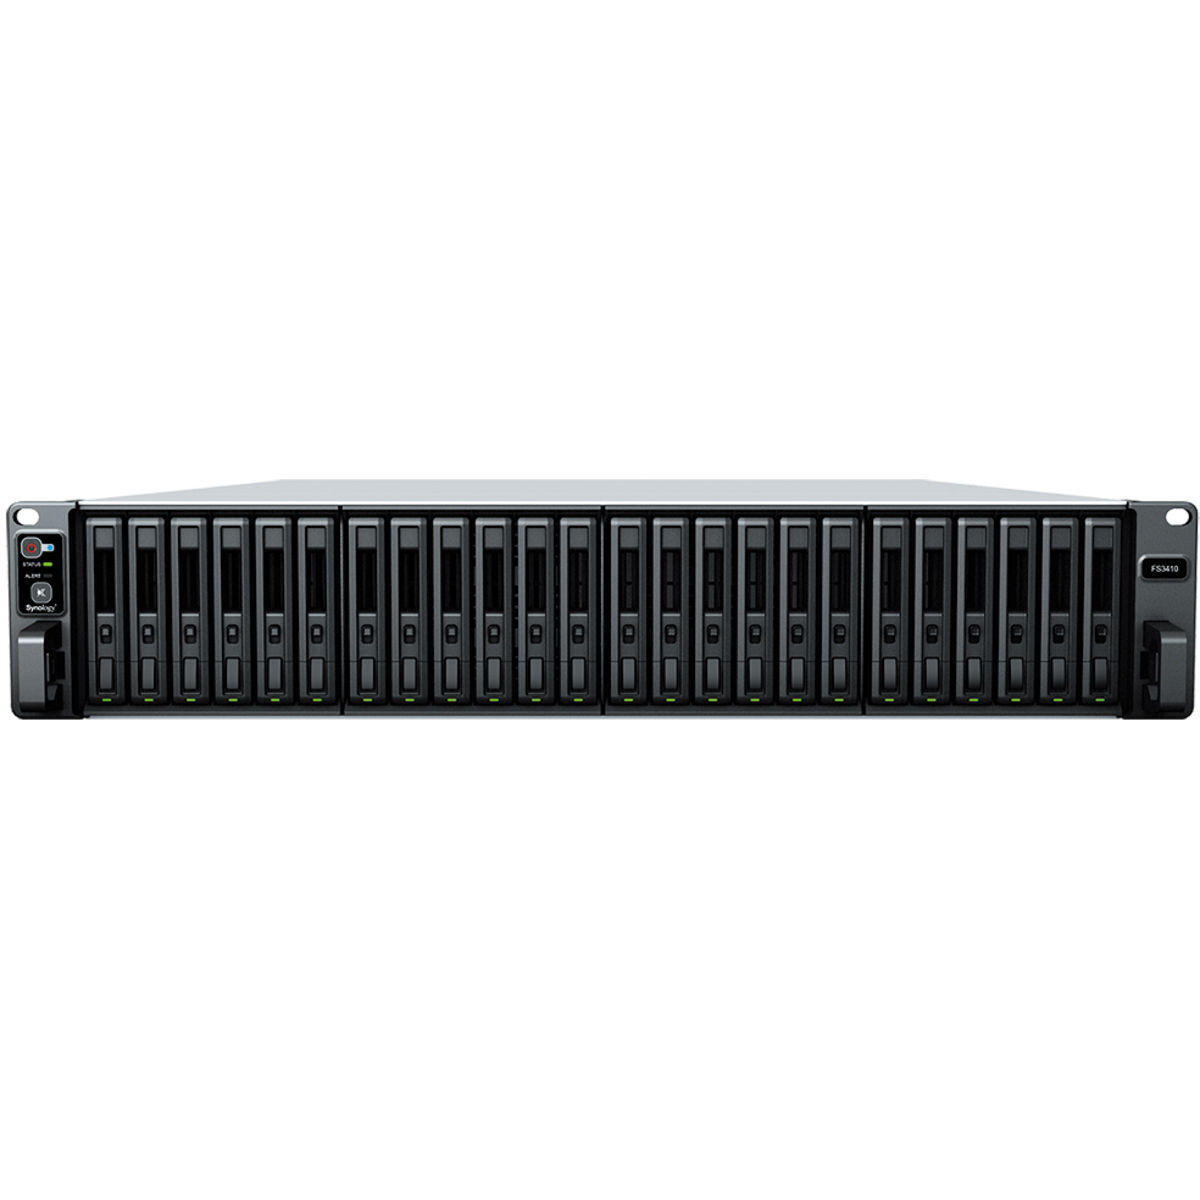 Synology FlashStation FS3410 65.2tb 24-Bay RackMount Large Business / Enterprise NAS - Network Attached Storage Device 17x3.8tb Synology SAT5210 Series SAT5210-3840G 2.5 530/500MB/s SATA 6Gb/s SSD ENTERPRISE Class Drives Installed - Burn-In Tested FlashStation FS3410